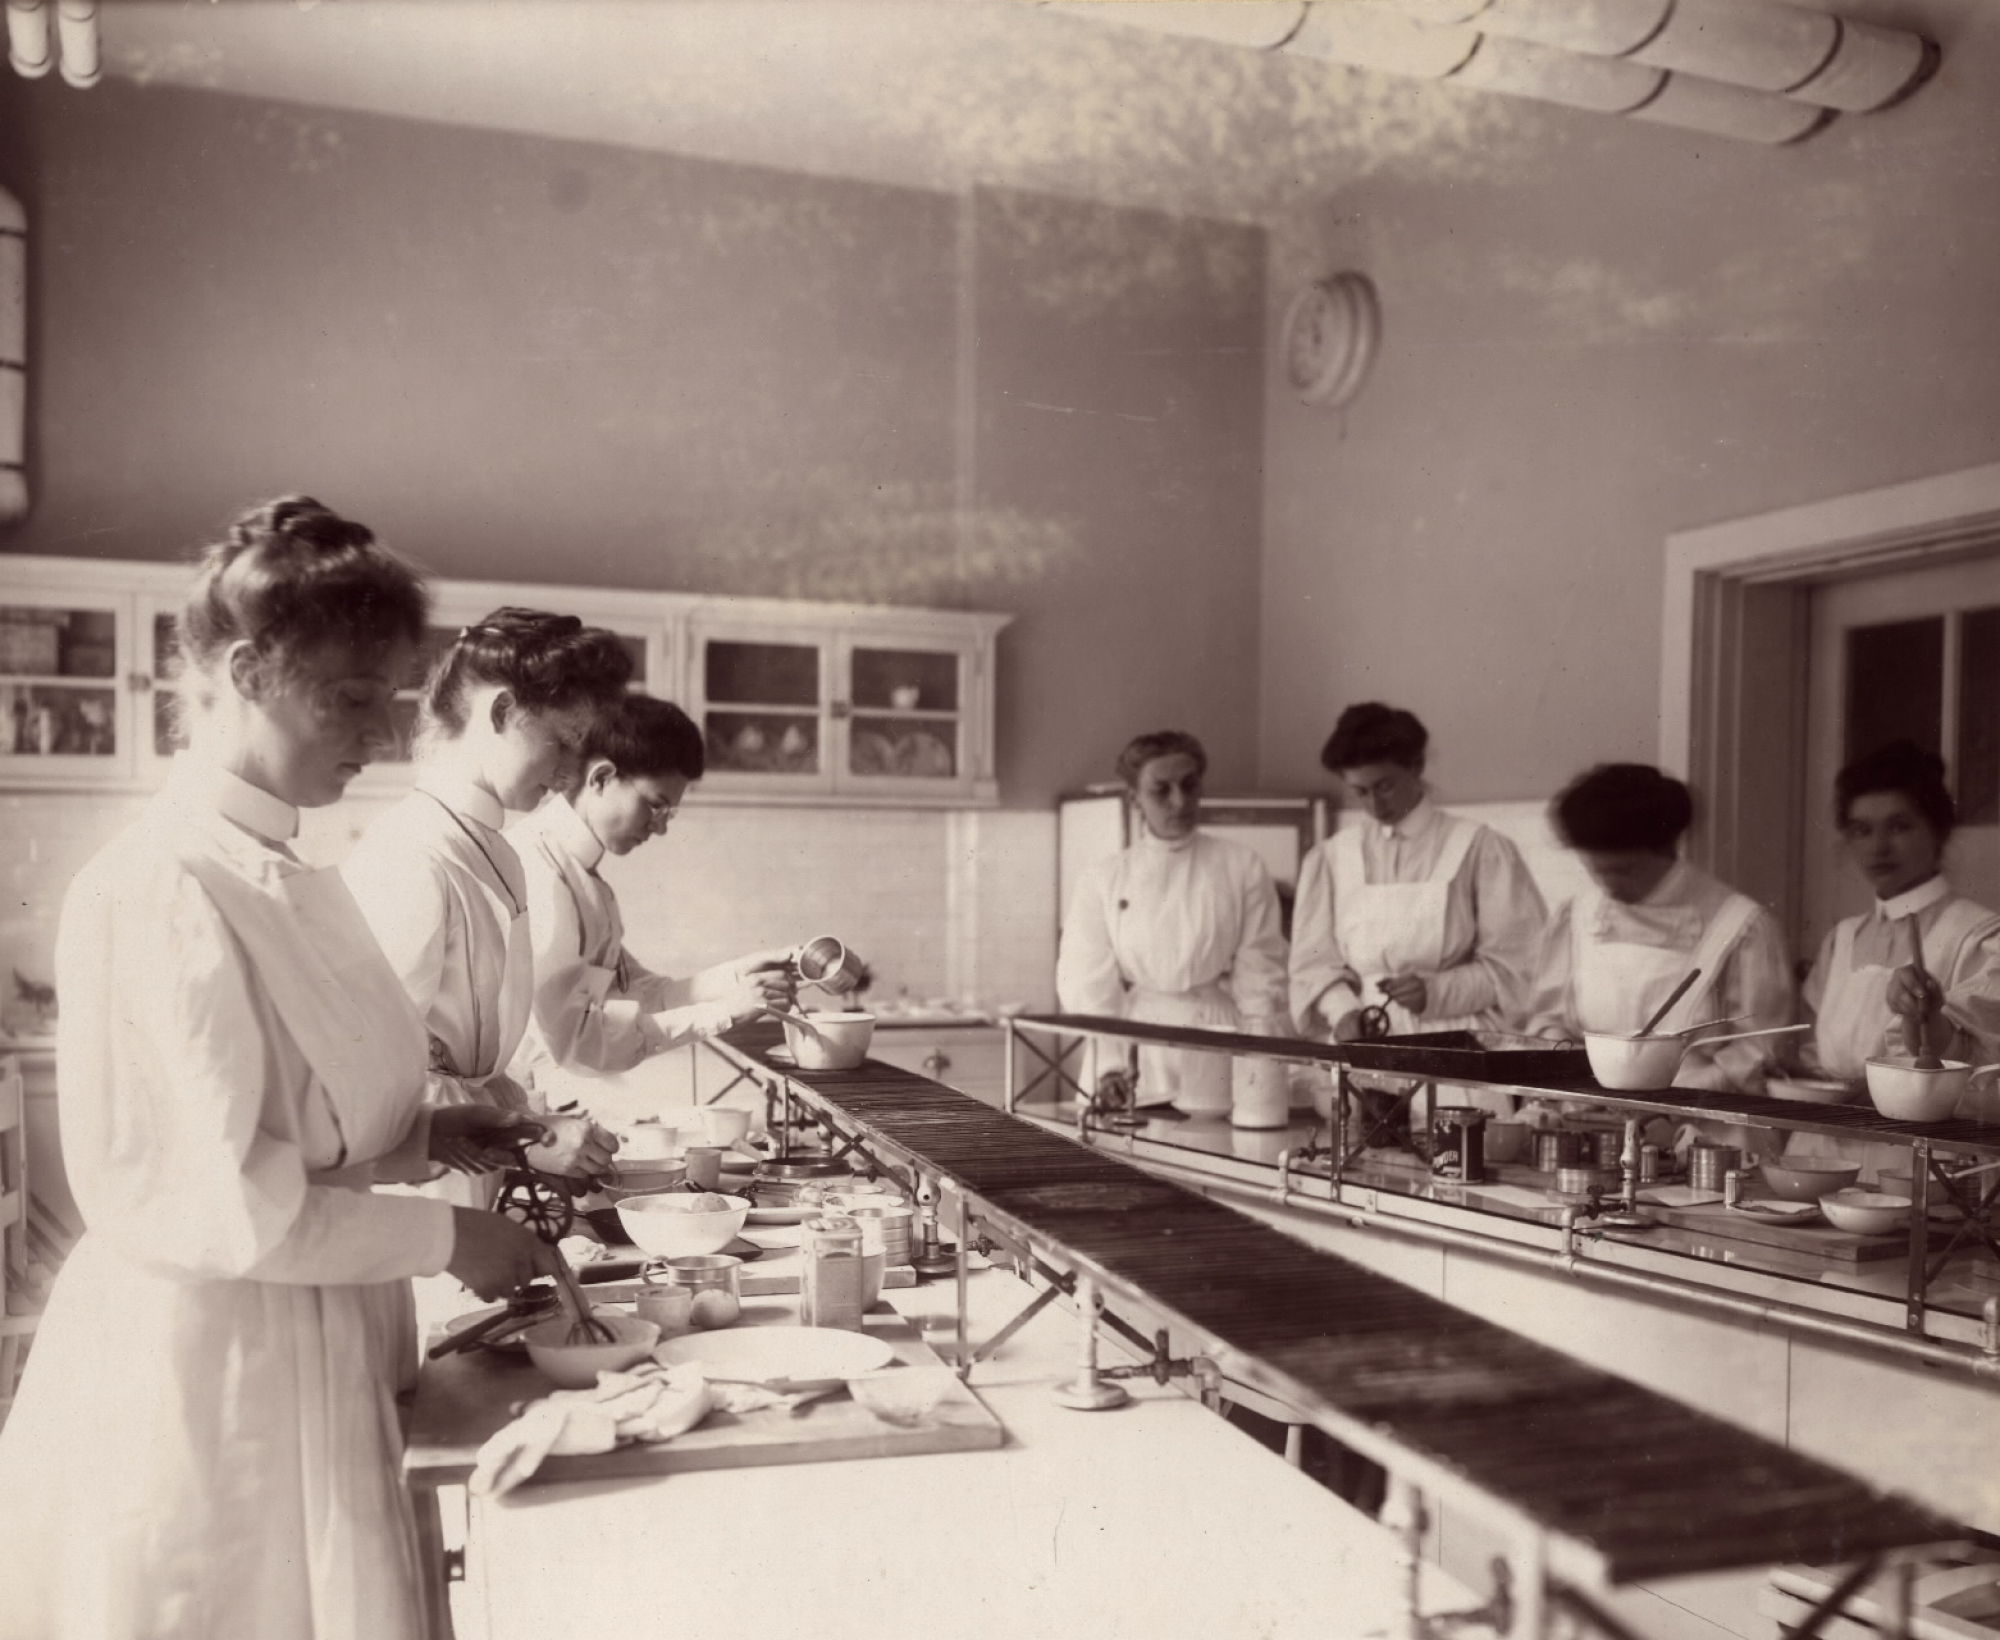 Sepia-toned image of nurses working in a kitchen plating food on long counters.